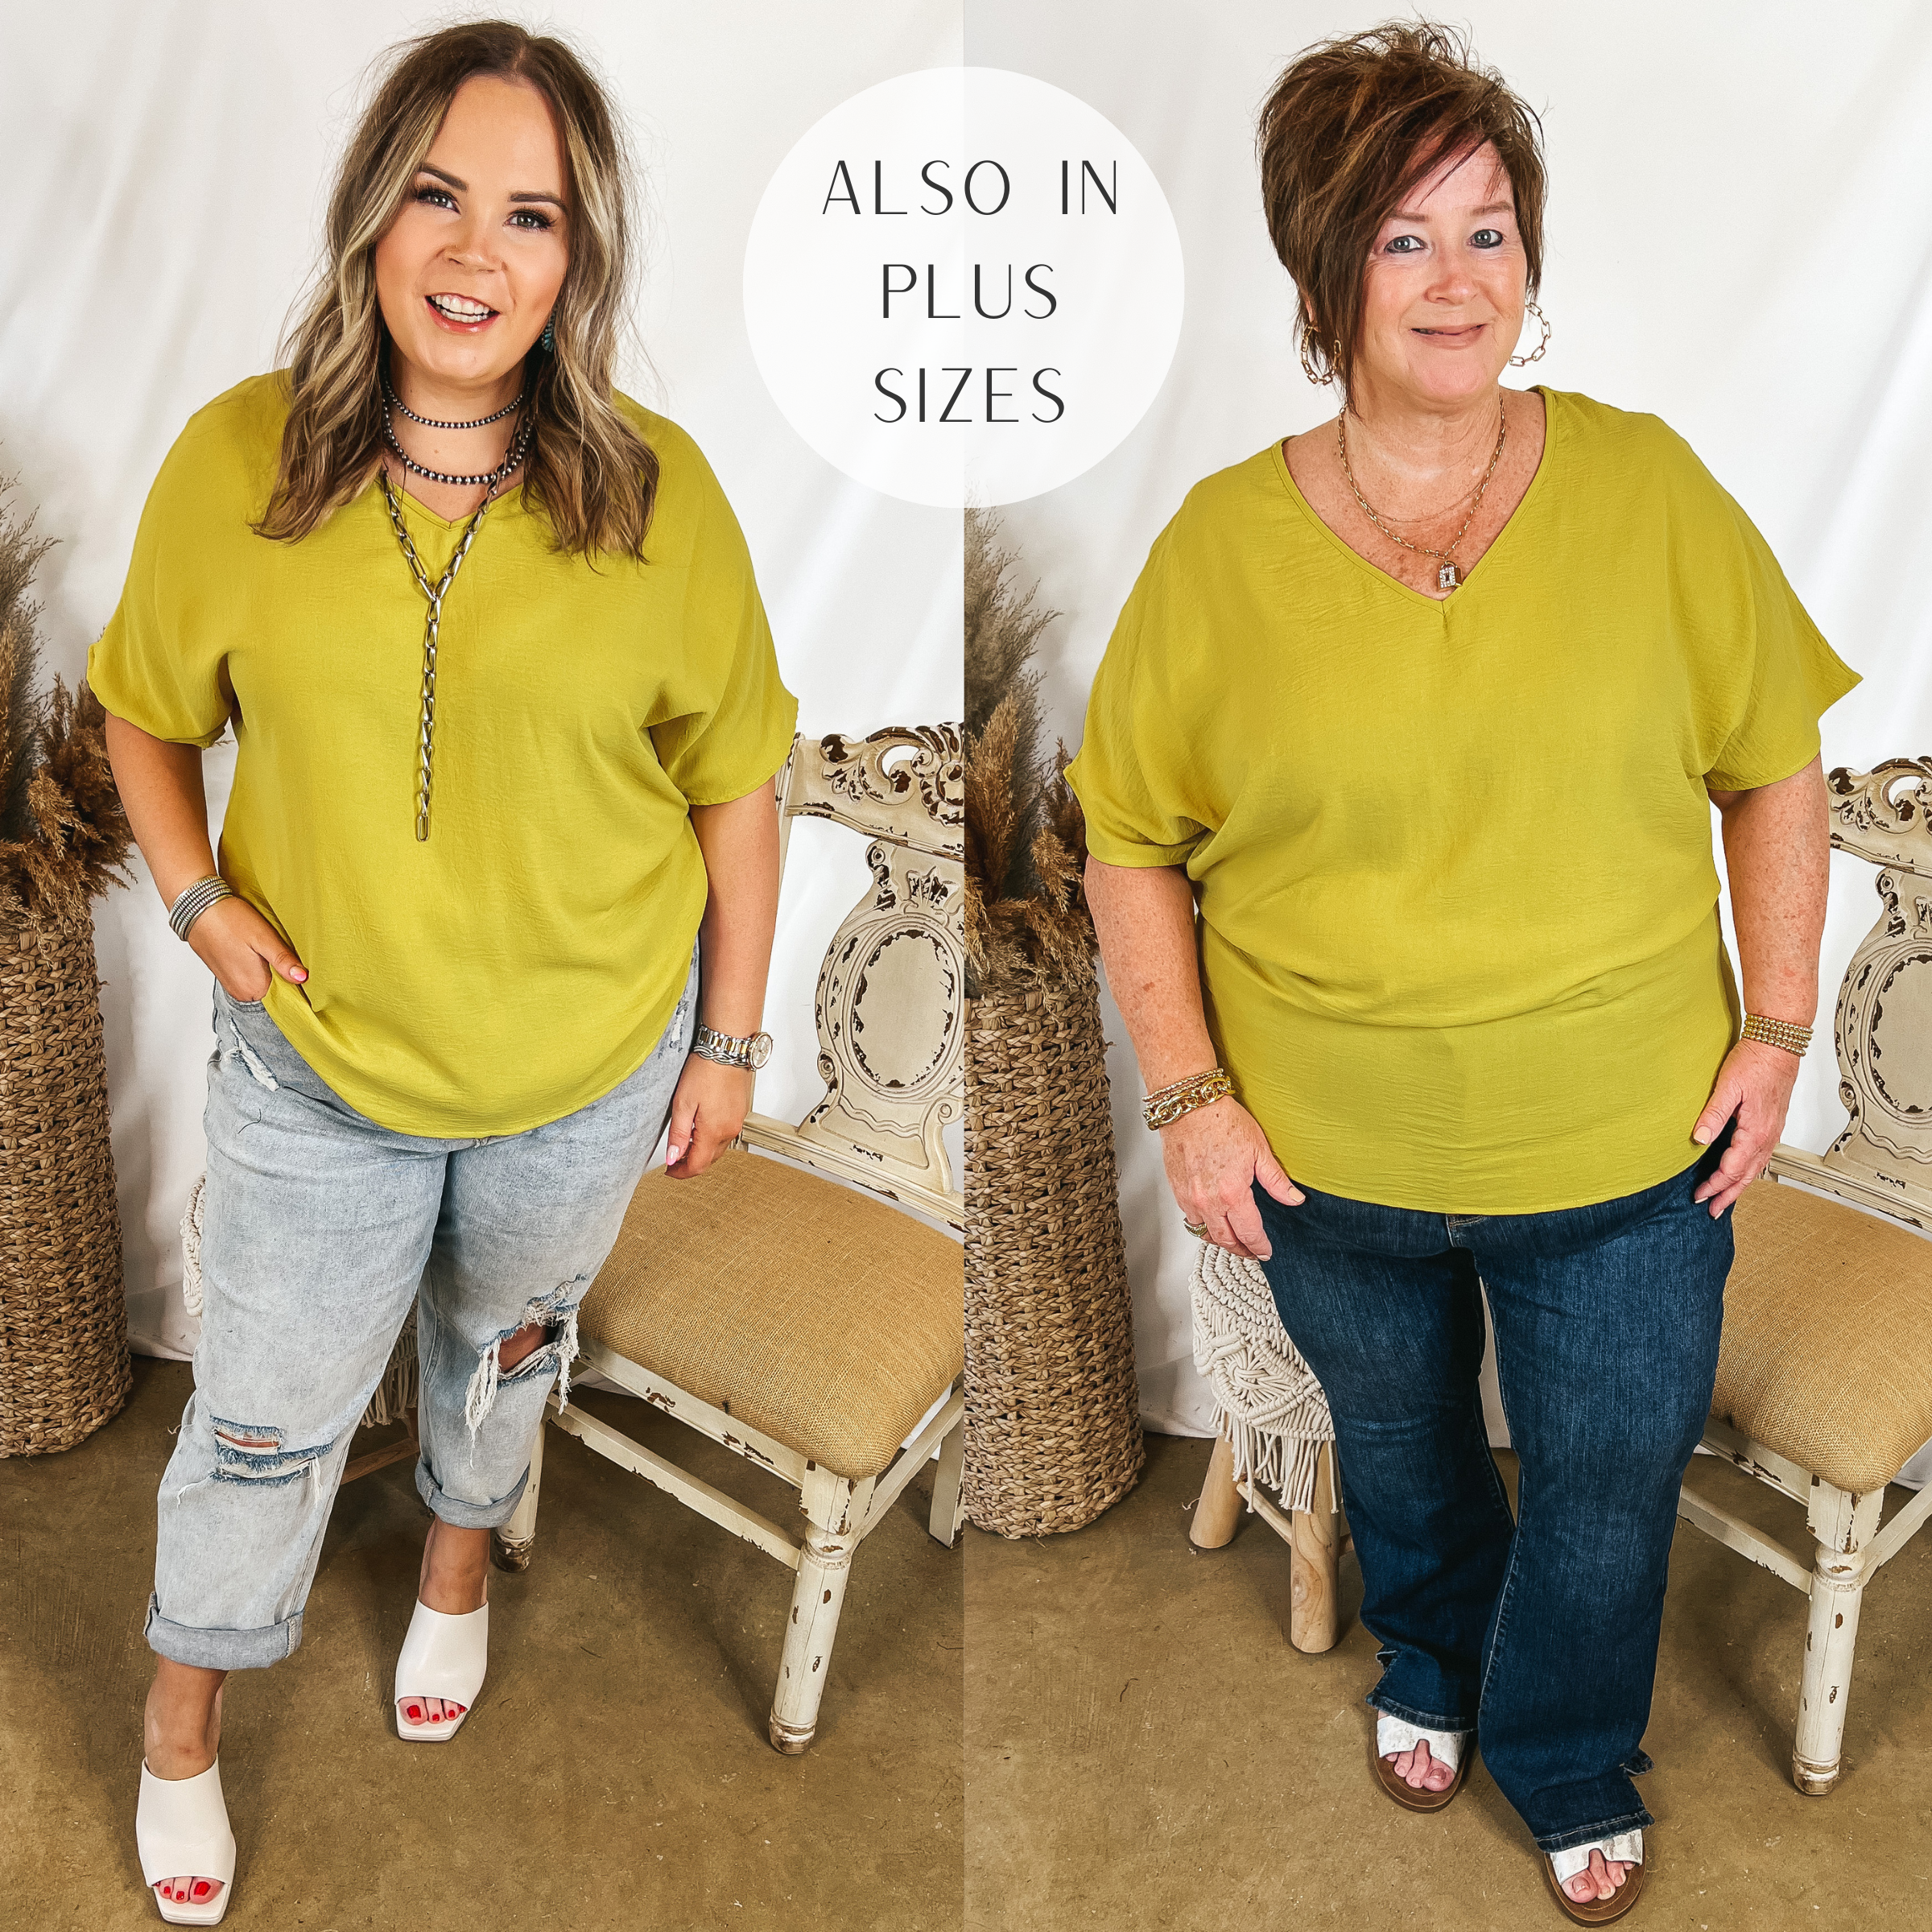 Models are wearing an oversized v neck tee that is a yellowish green color. Size large model has it paired with light wash jeans, white heels, and silver jewelry. Plus size model has it paired with bootcut jeans, white sandals, and gold jewelry.